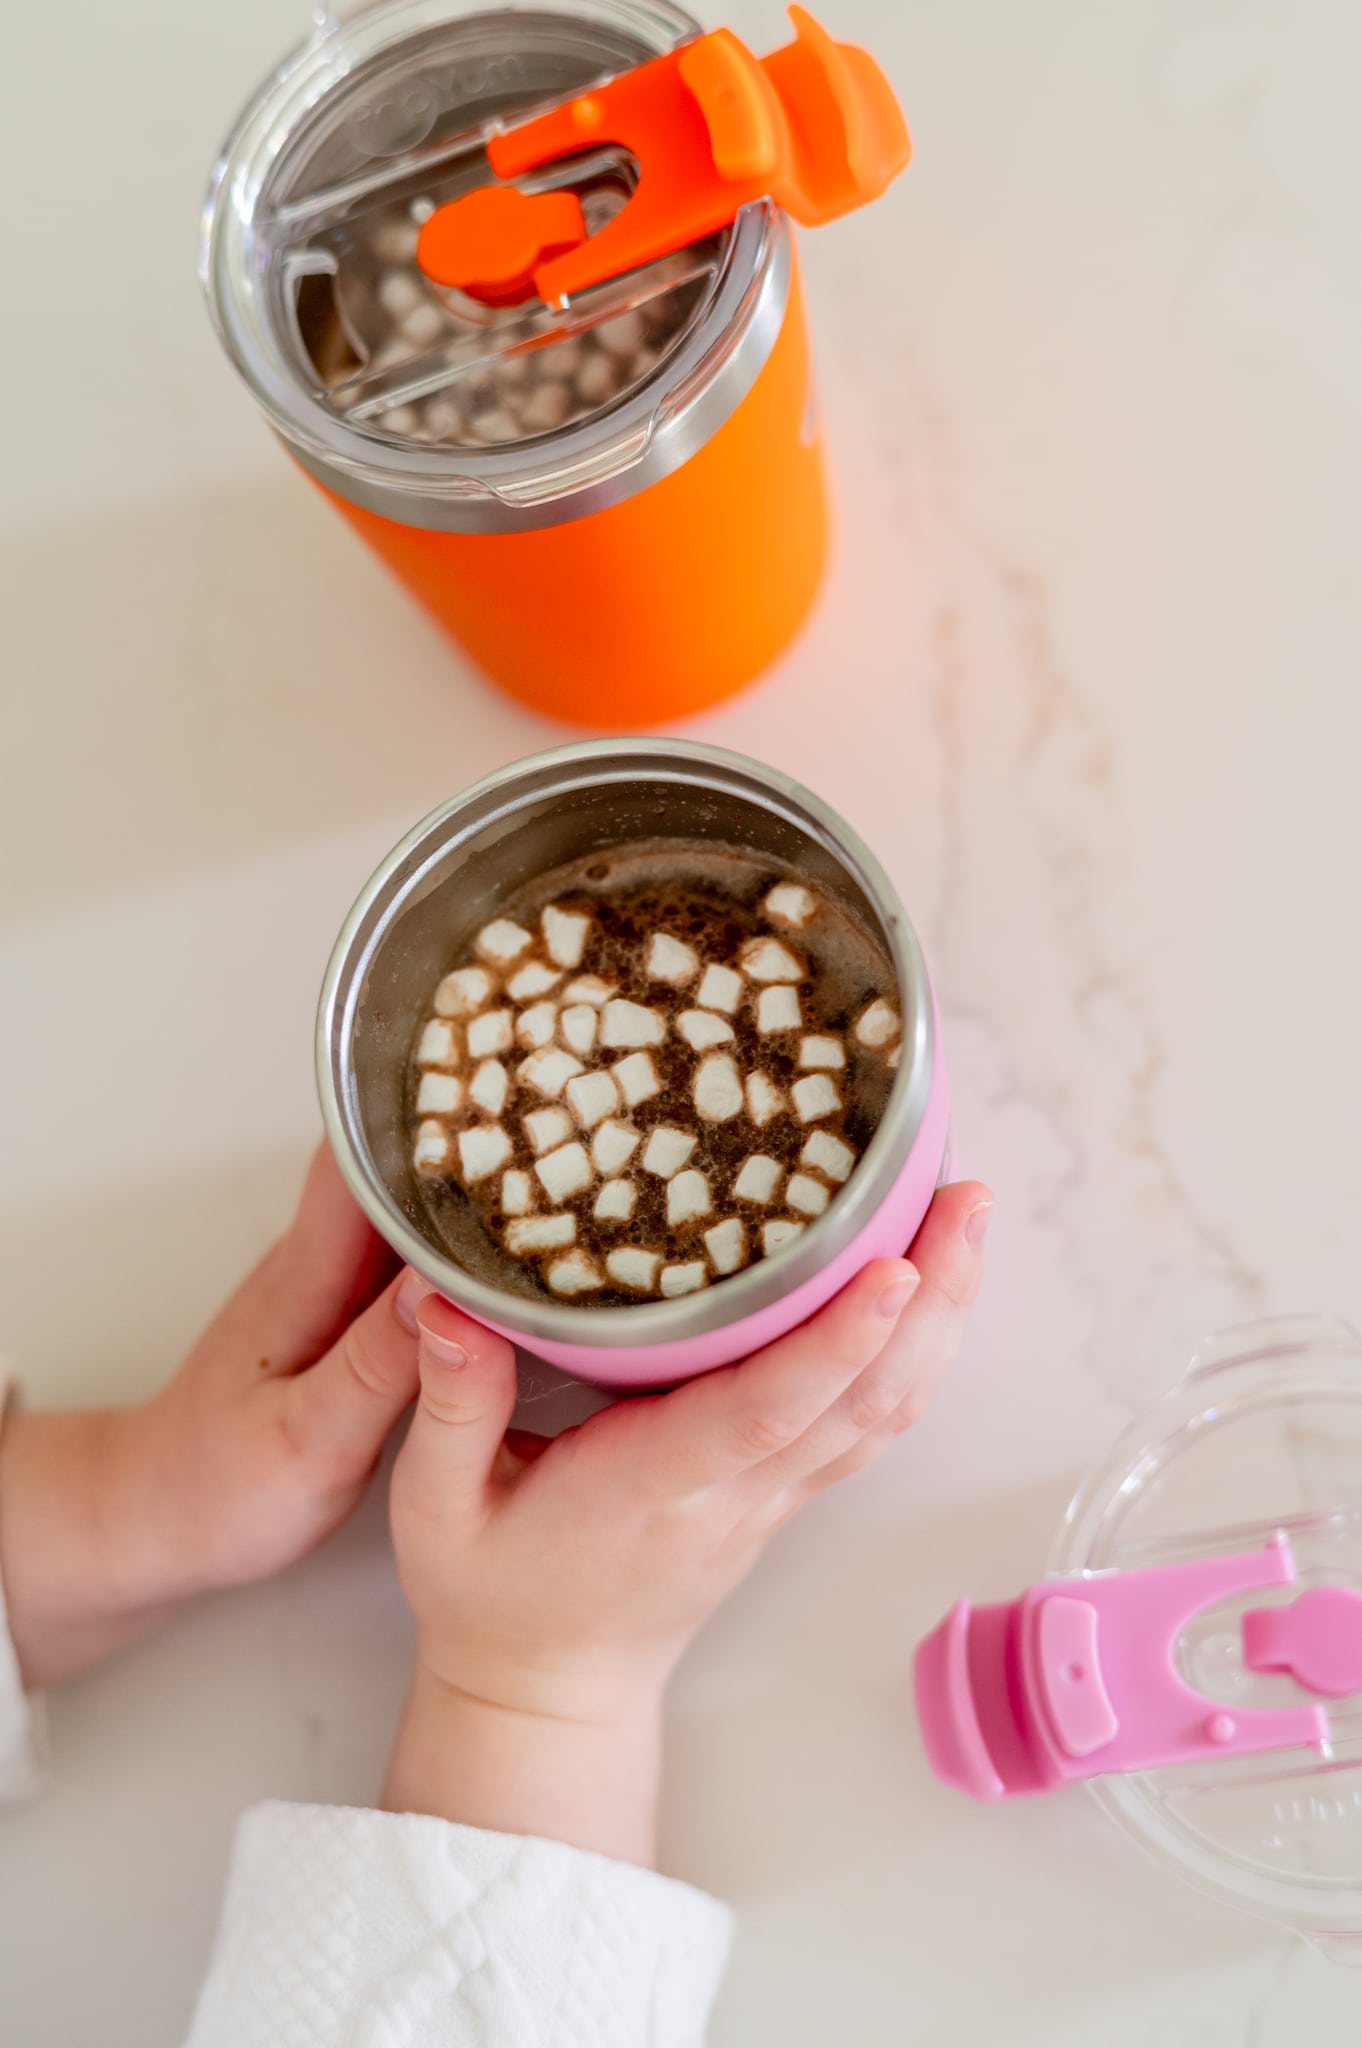 Two insulated kid cups filled with hot cocoa and marshmallows